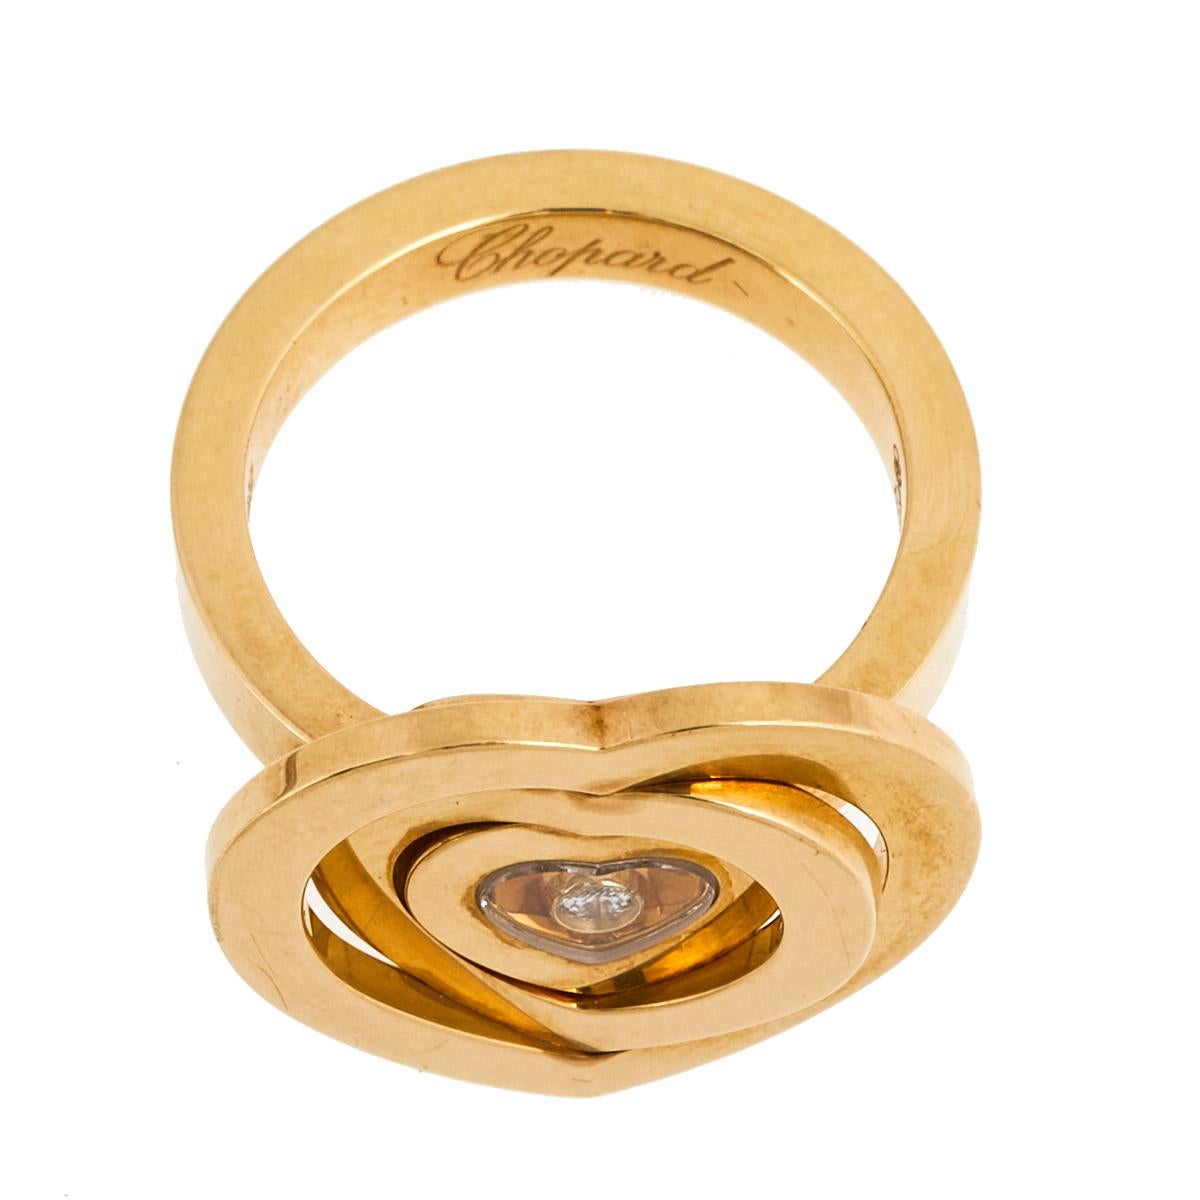 A collection loved by fashion lovers all around, the Chopard Happy Spirit collection brings out this beautiful ring for you to flaunt. Flawlessly constructed in 18K yellow gold, this ring features three graduating hearts at the head with a floating